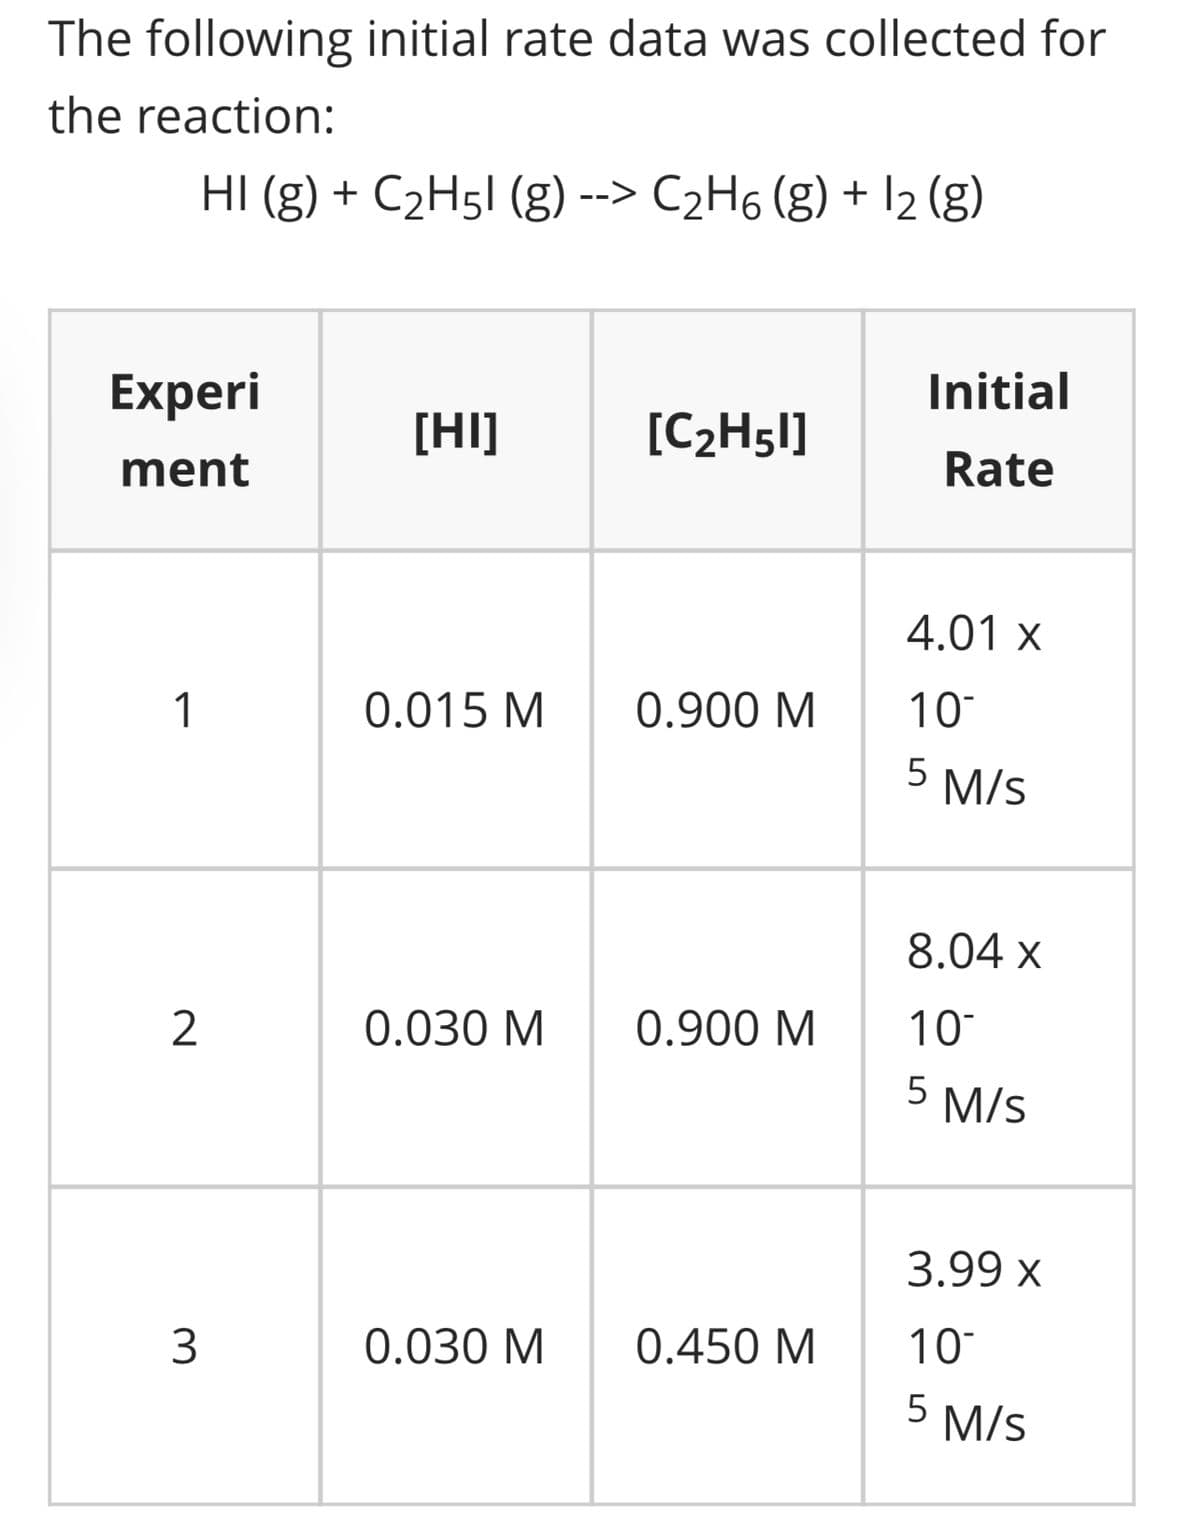 The following initial rate data was collected for
the reaction:
Experi
ment
1
2
HI (g) + C₂H5l (g) --> C₂H6 (g) + 1₂ (g)
3
[HI]
0.015 M
0.030 M
0.030 M
[C₂H51]
0.900 M
0.900 M
0.450 M
Initial
Rate
4.01 x
10
5 M/S
8.04 x
10
5 M/s
3.99 x
10
5 M/S